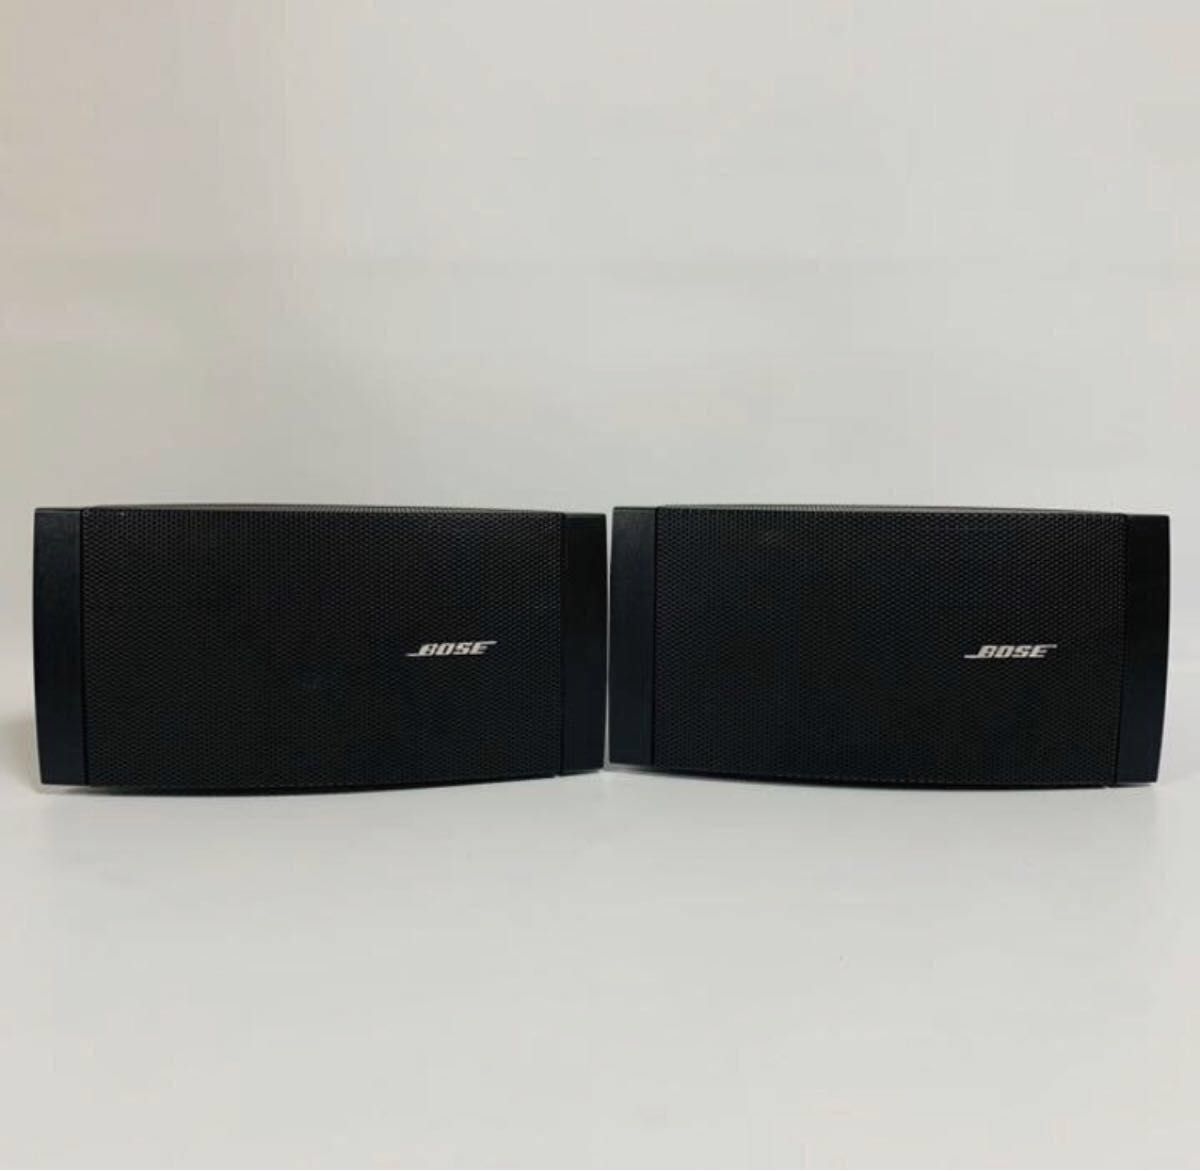 Bose FreeSpace 全天候型スピーカー DS16S 2台セット 壁掛け金具付き